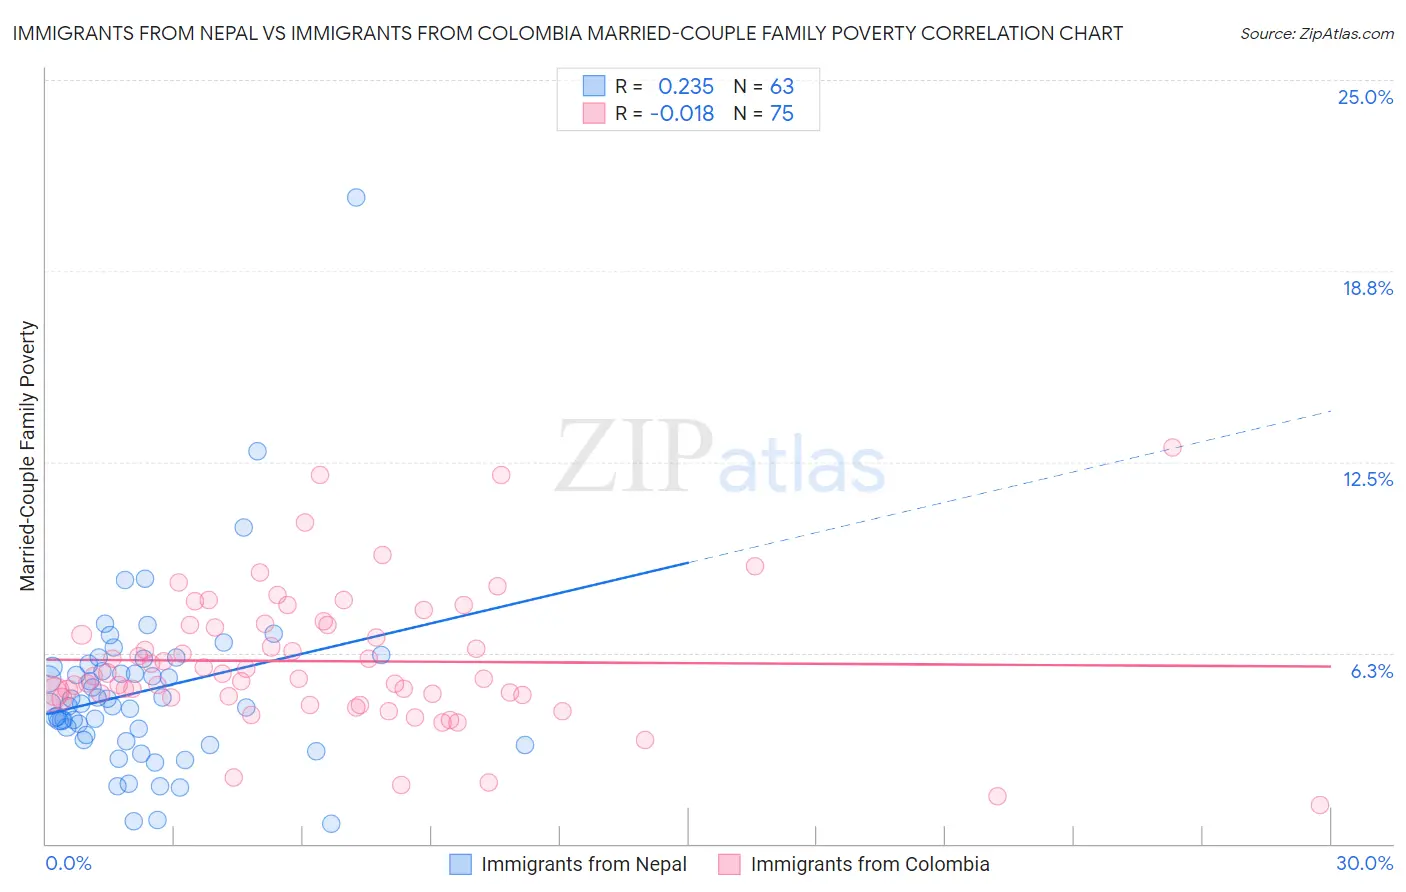 Immigrants from Nepal vs Immigrants from Colombia Married-Couple Family Poverty